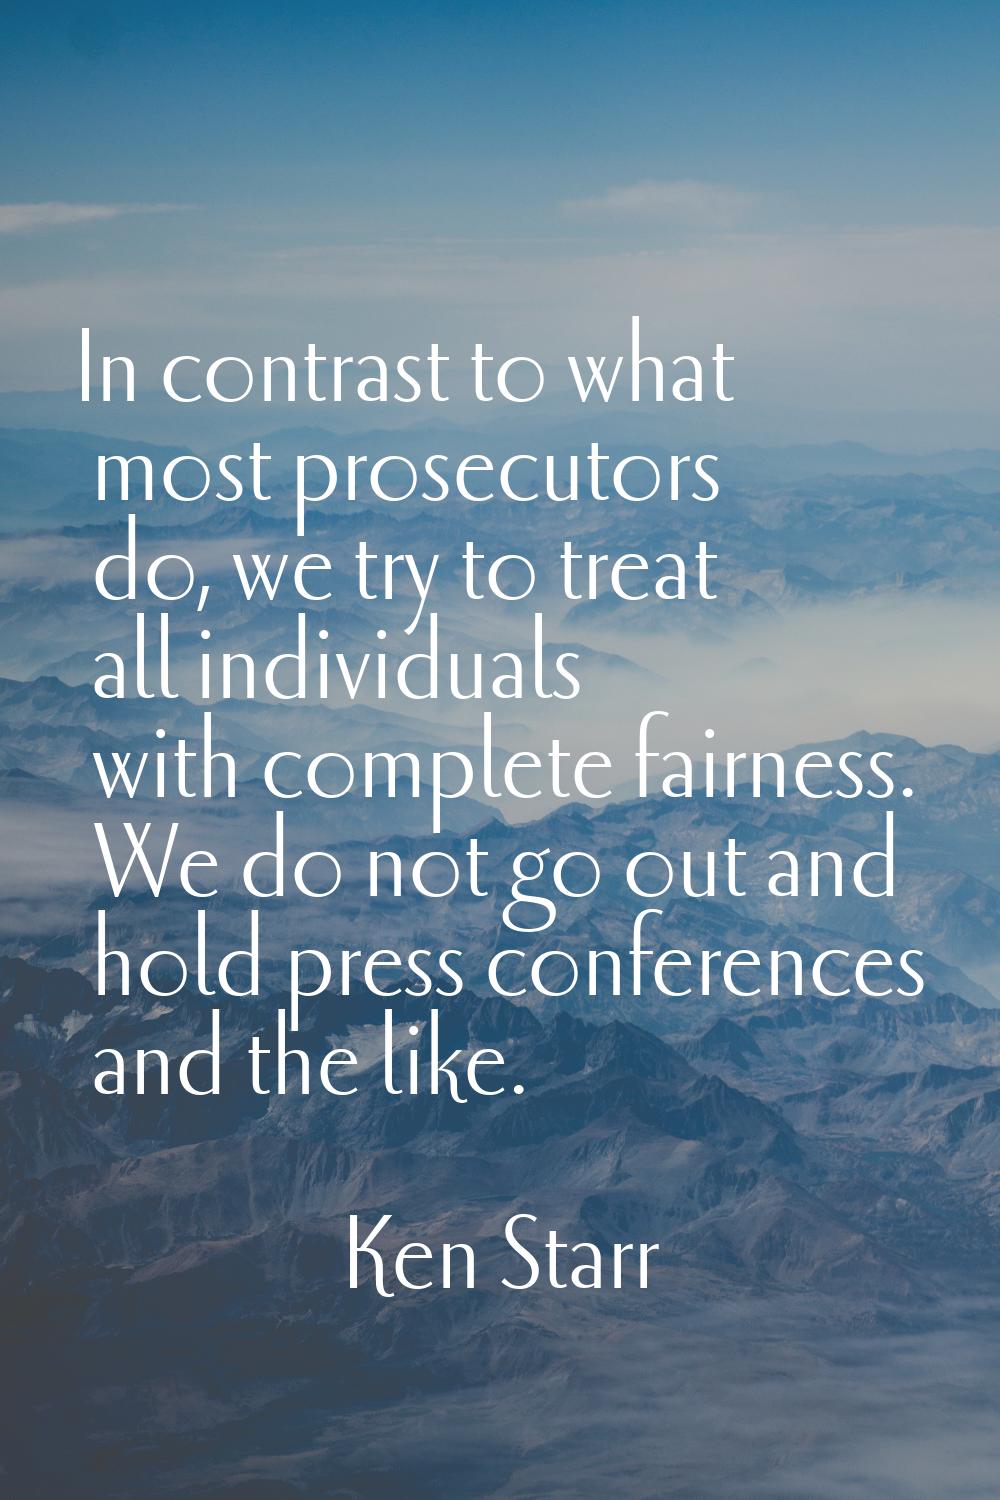 In contrast to what most prosecutors do, we try to treat all individuals with complete fairness. We